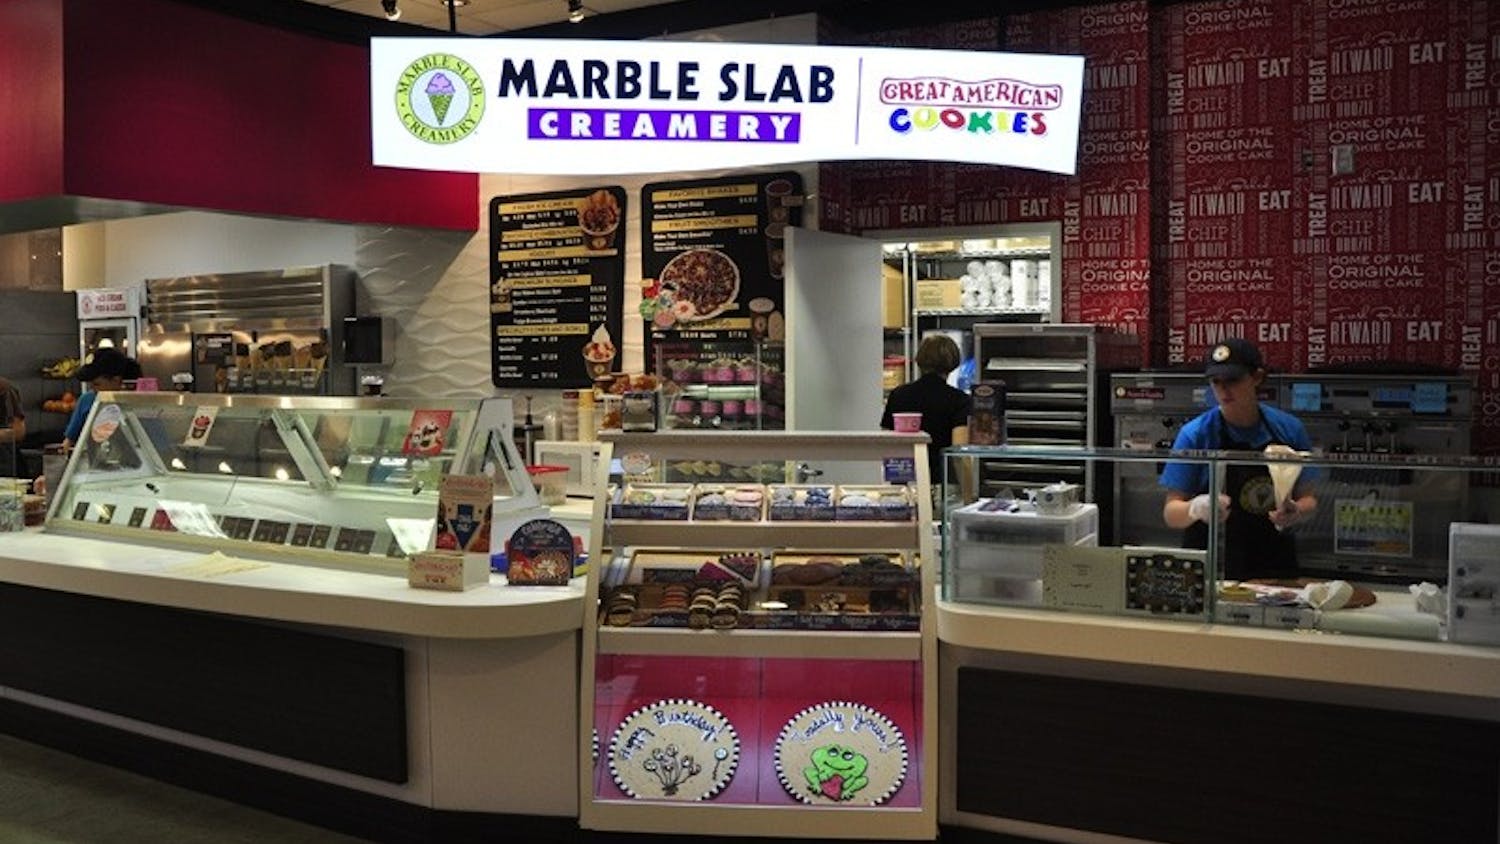 Marble Slab Creamery and the Great American Cookie Company have taken the place of Freshens.